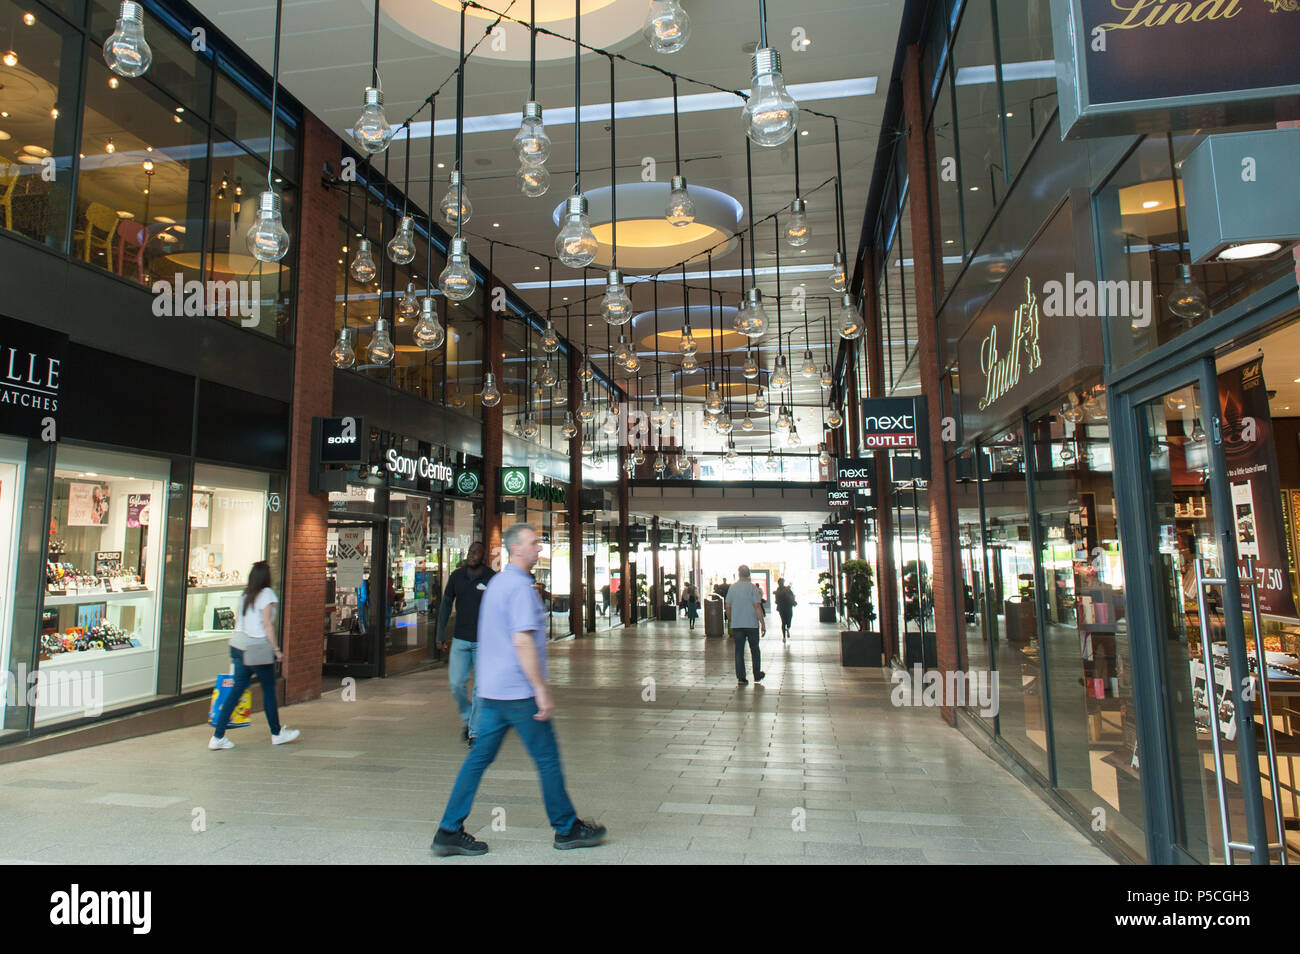 London Designer Outlet Shopping Mall High Resolution Stock Photography and  Images - Alamy